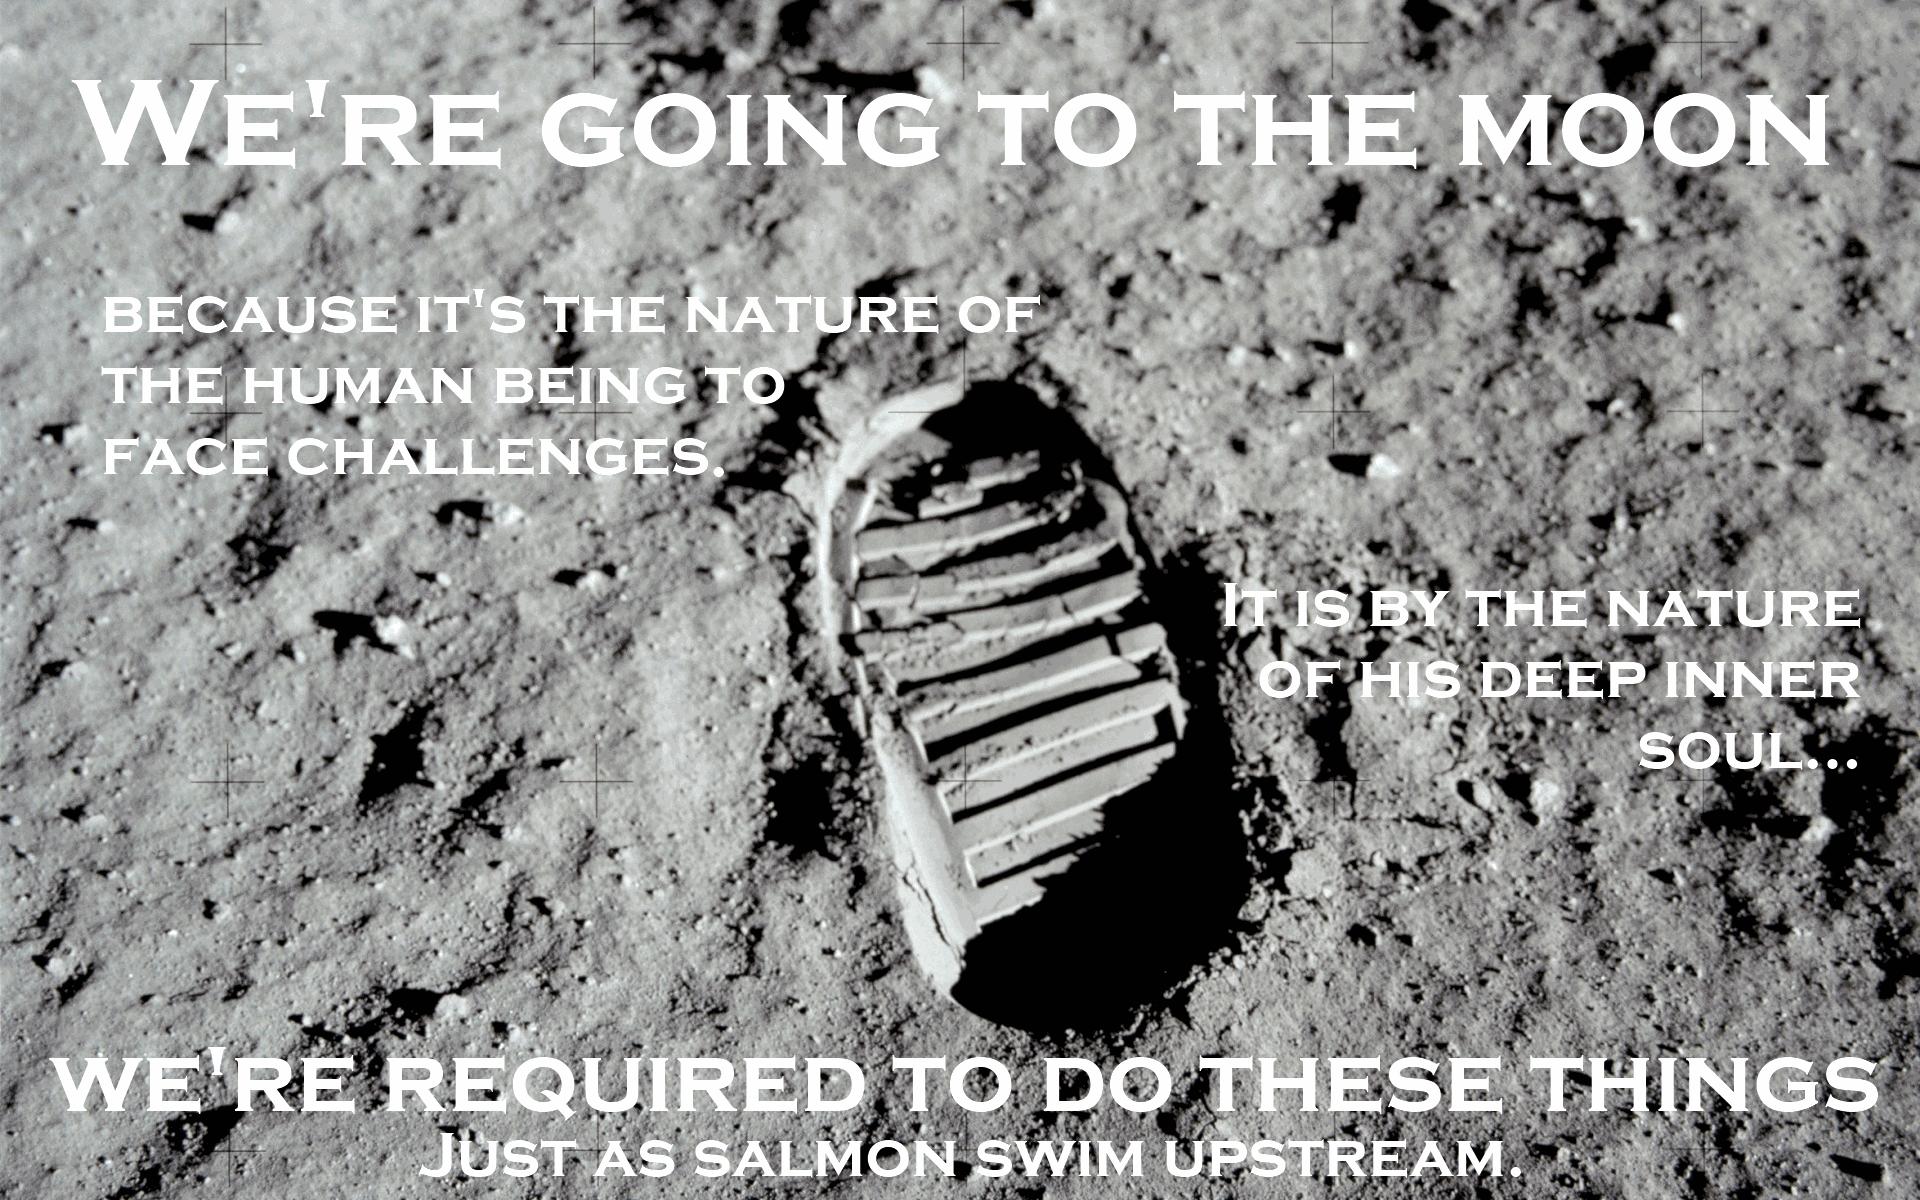 RIP Neil Armstrong [1920x1200](footprint quote)